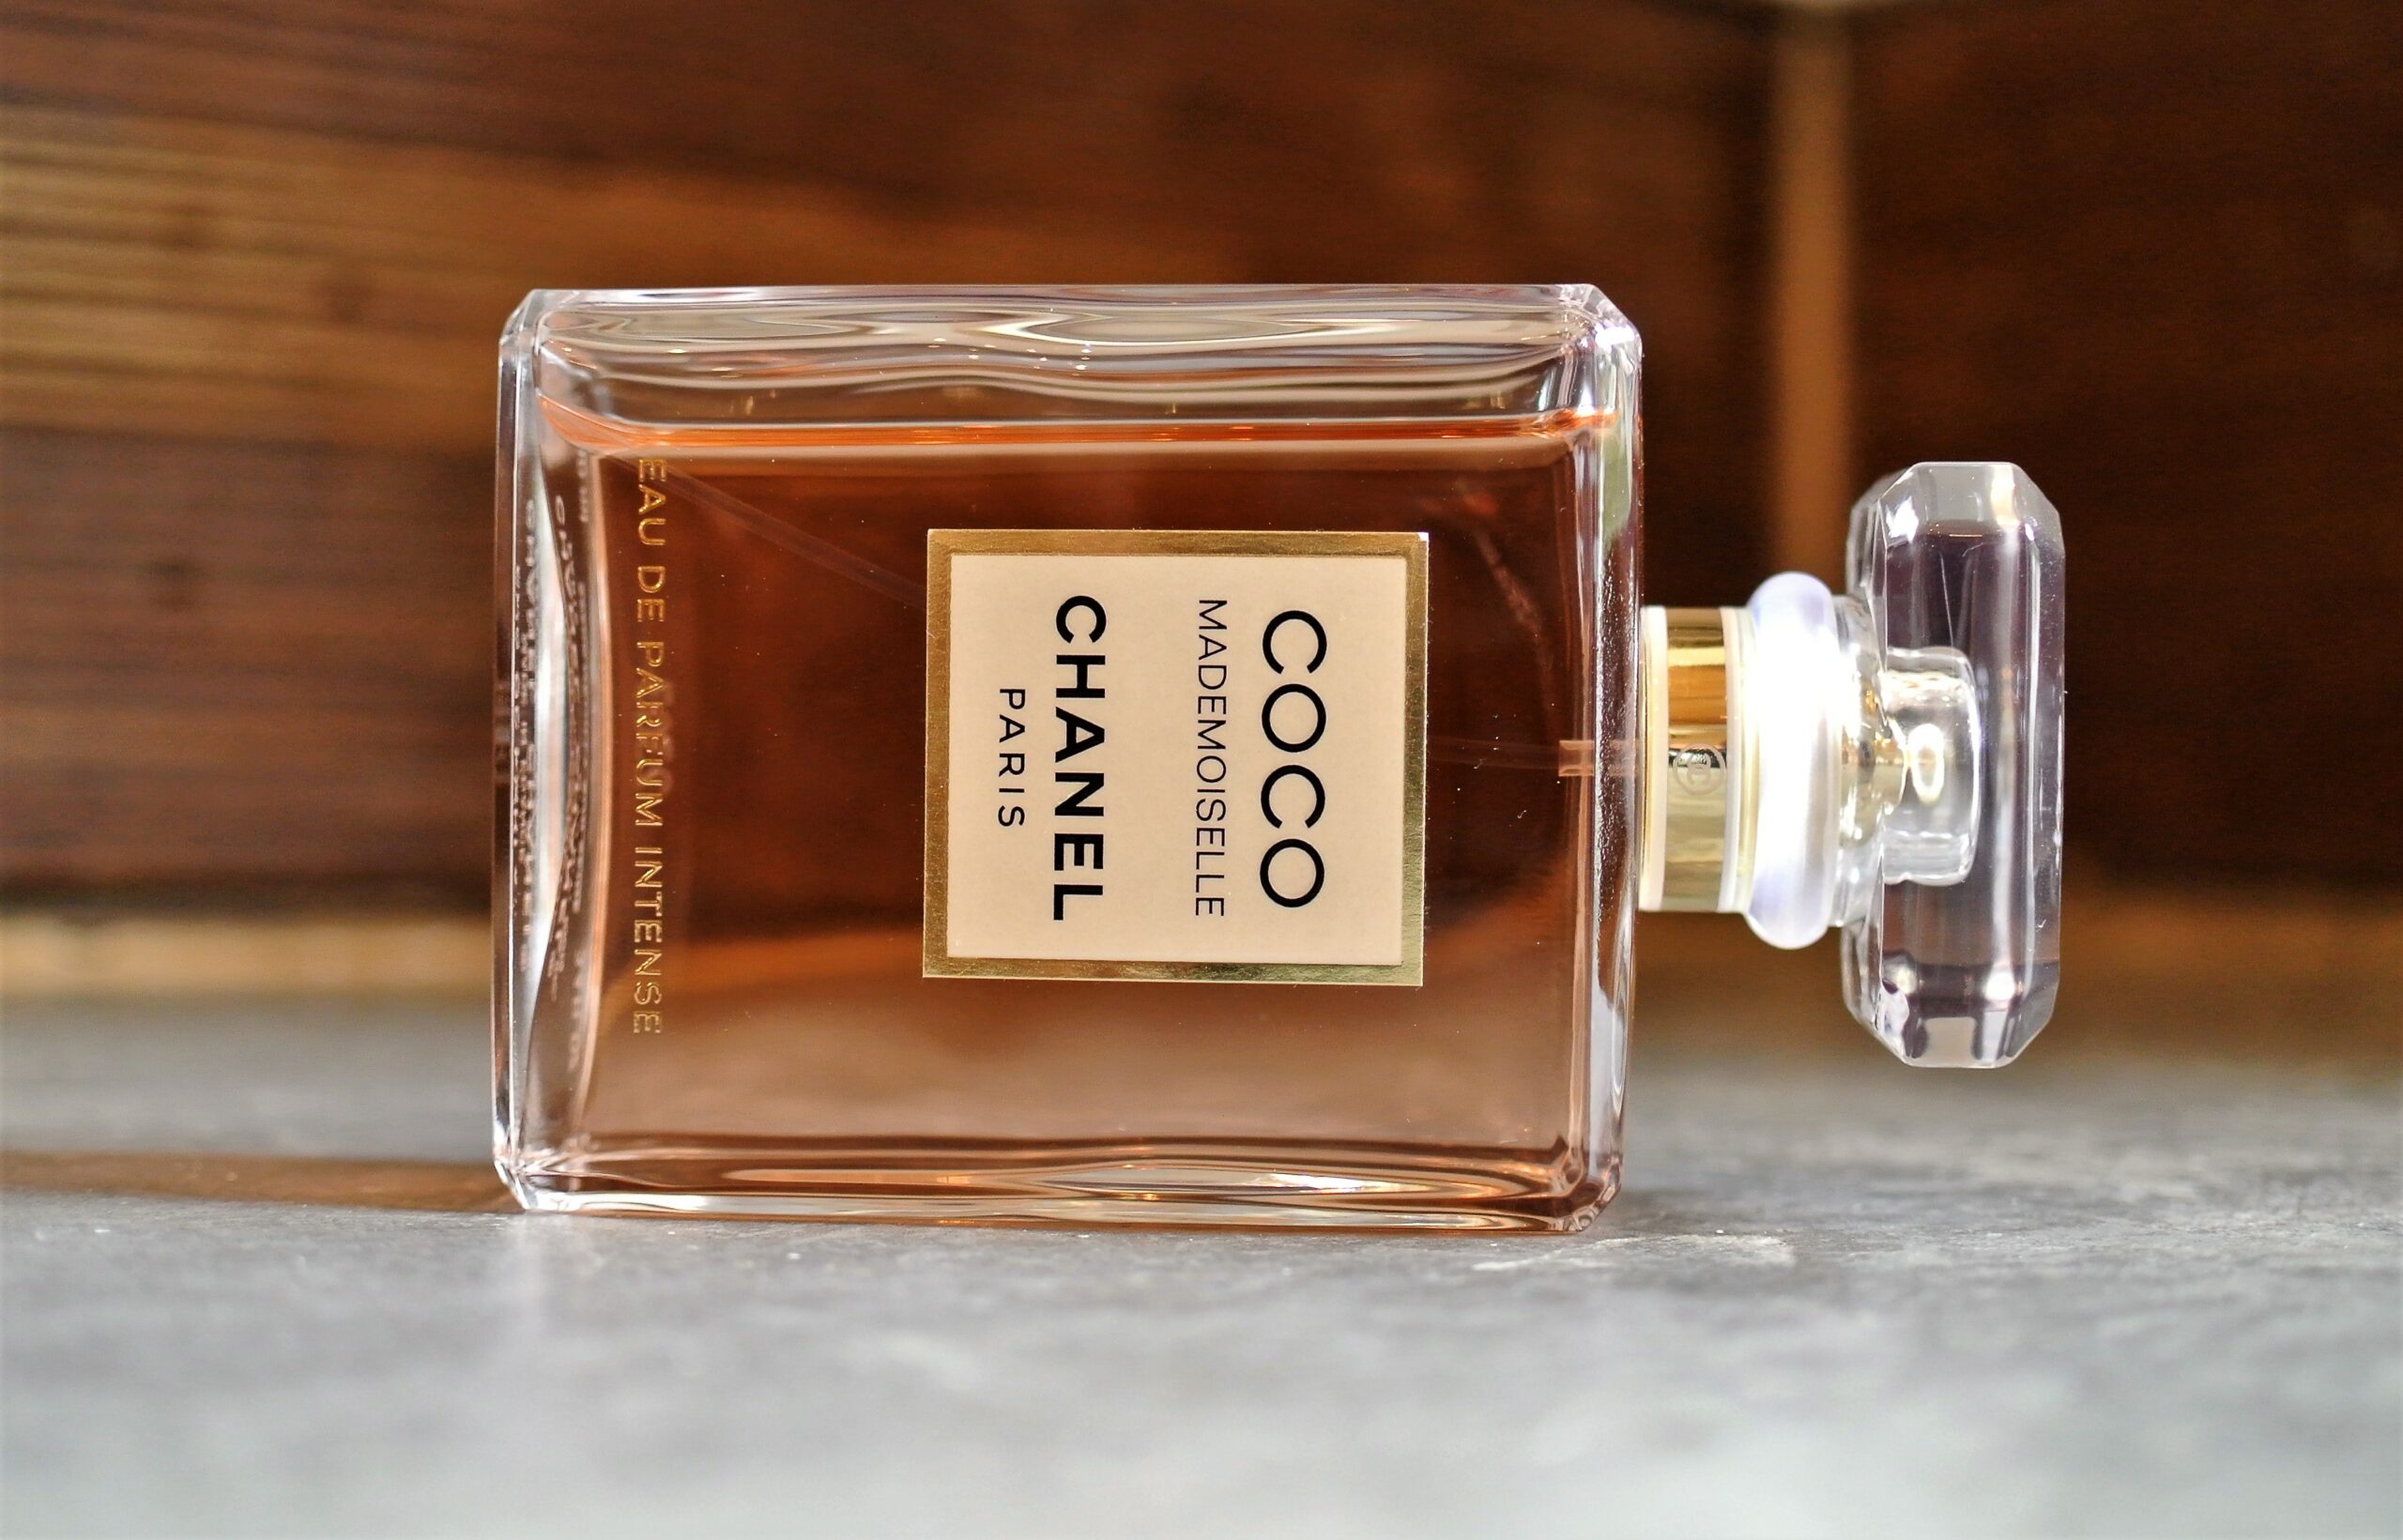 What does Coco Chanel Mademoiselle smell like?